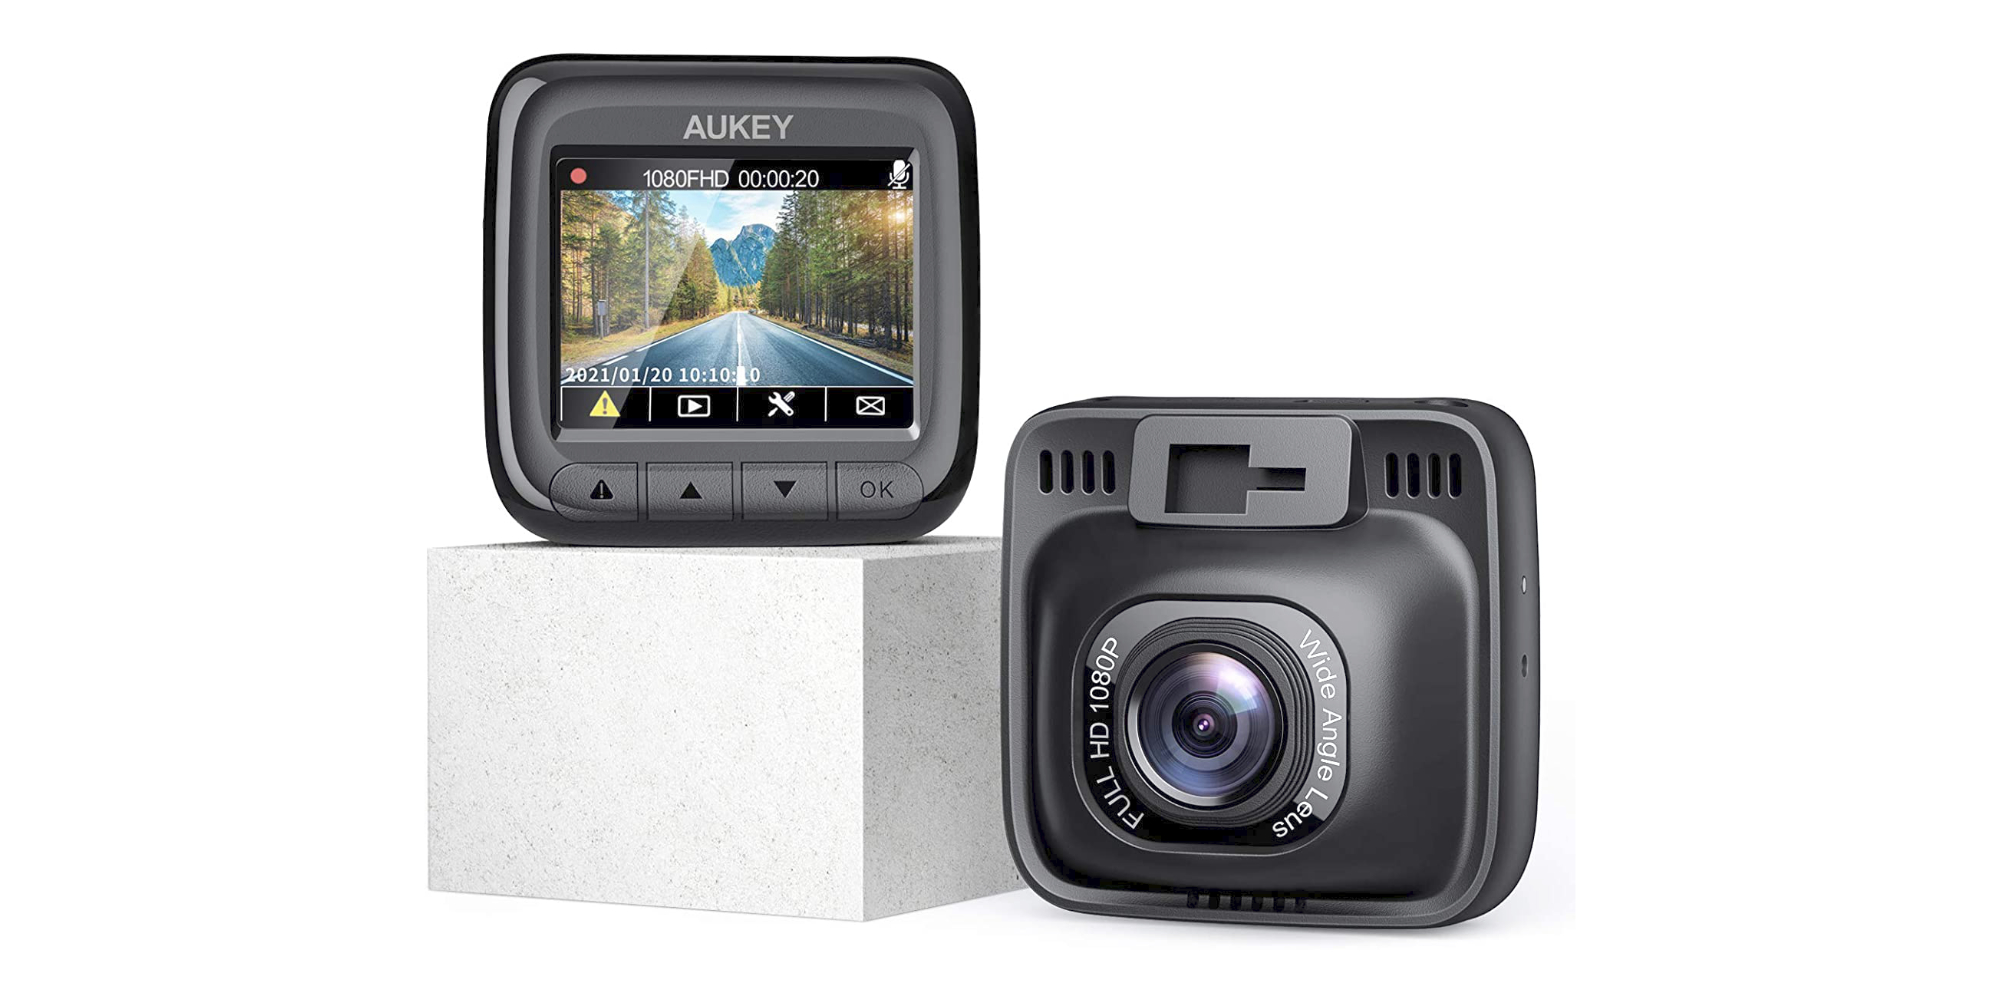 Bron petticoat Ideaal AUKEY's ultra-compact 1080p dash cam spans less than 2.3 inches: $39.50  (Save 34%)